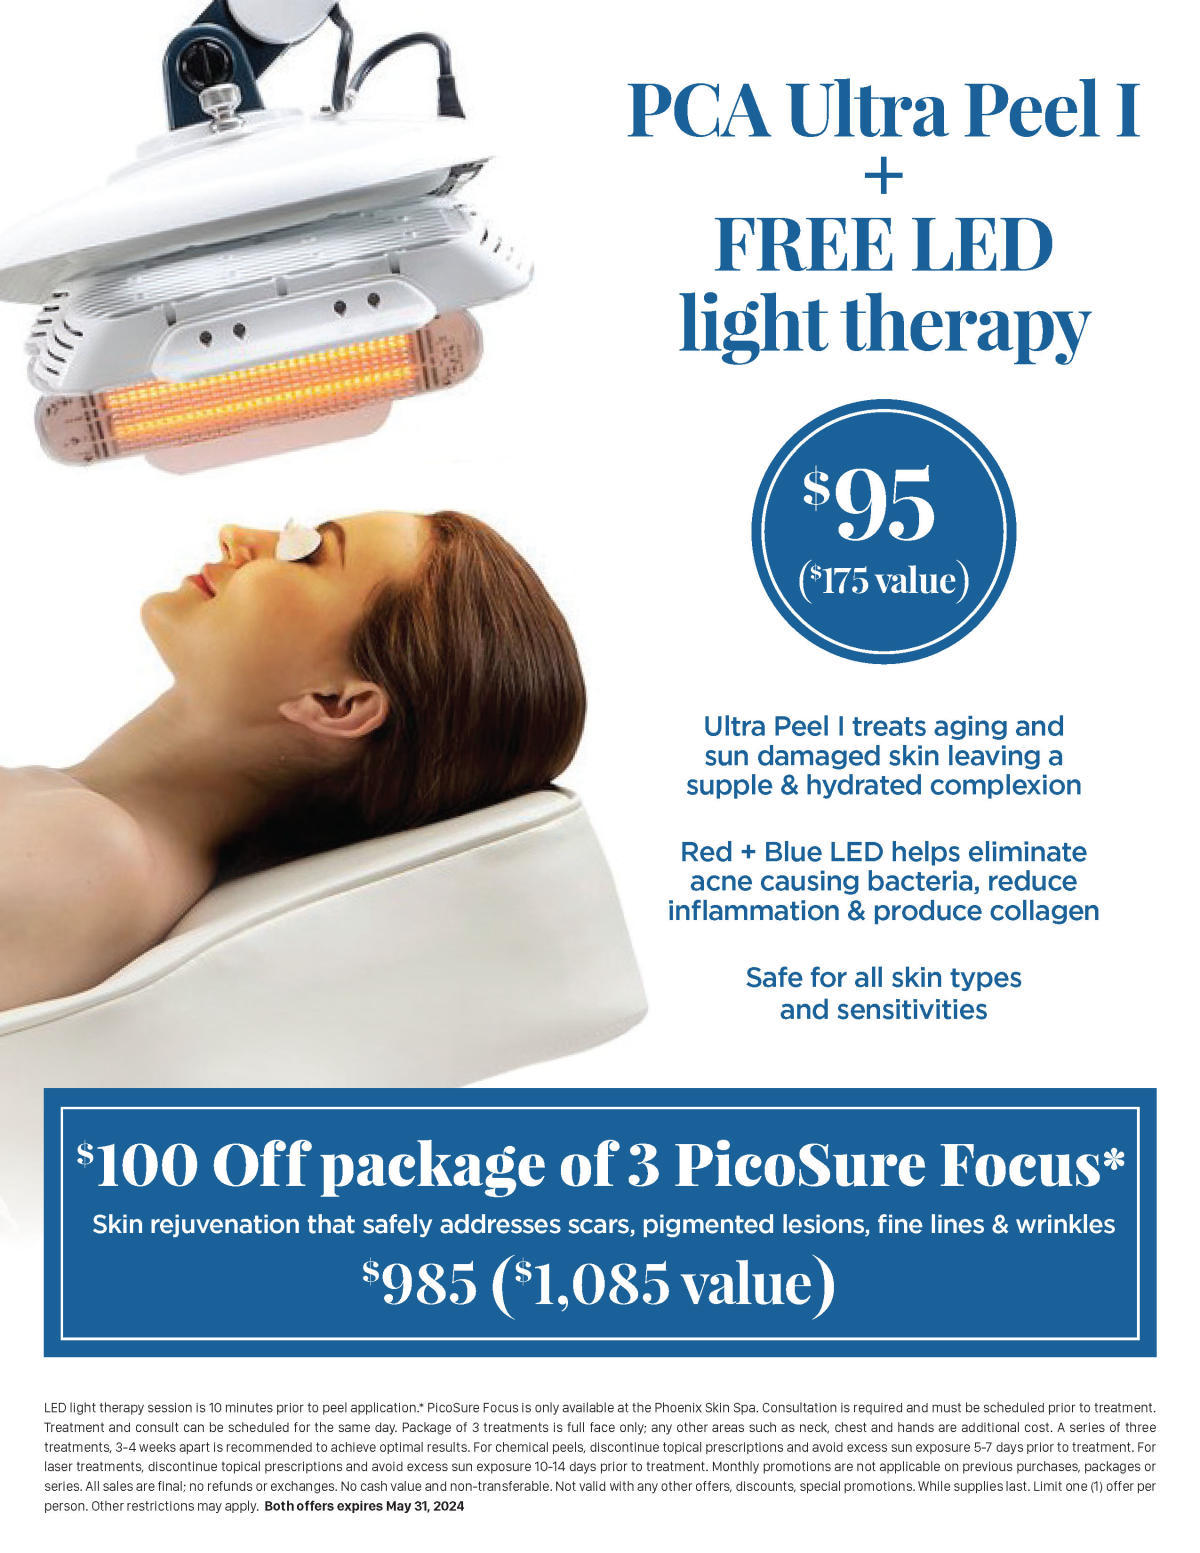 Special PCA Ultra Peel I + Free LED light therapy 